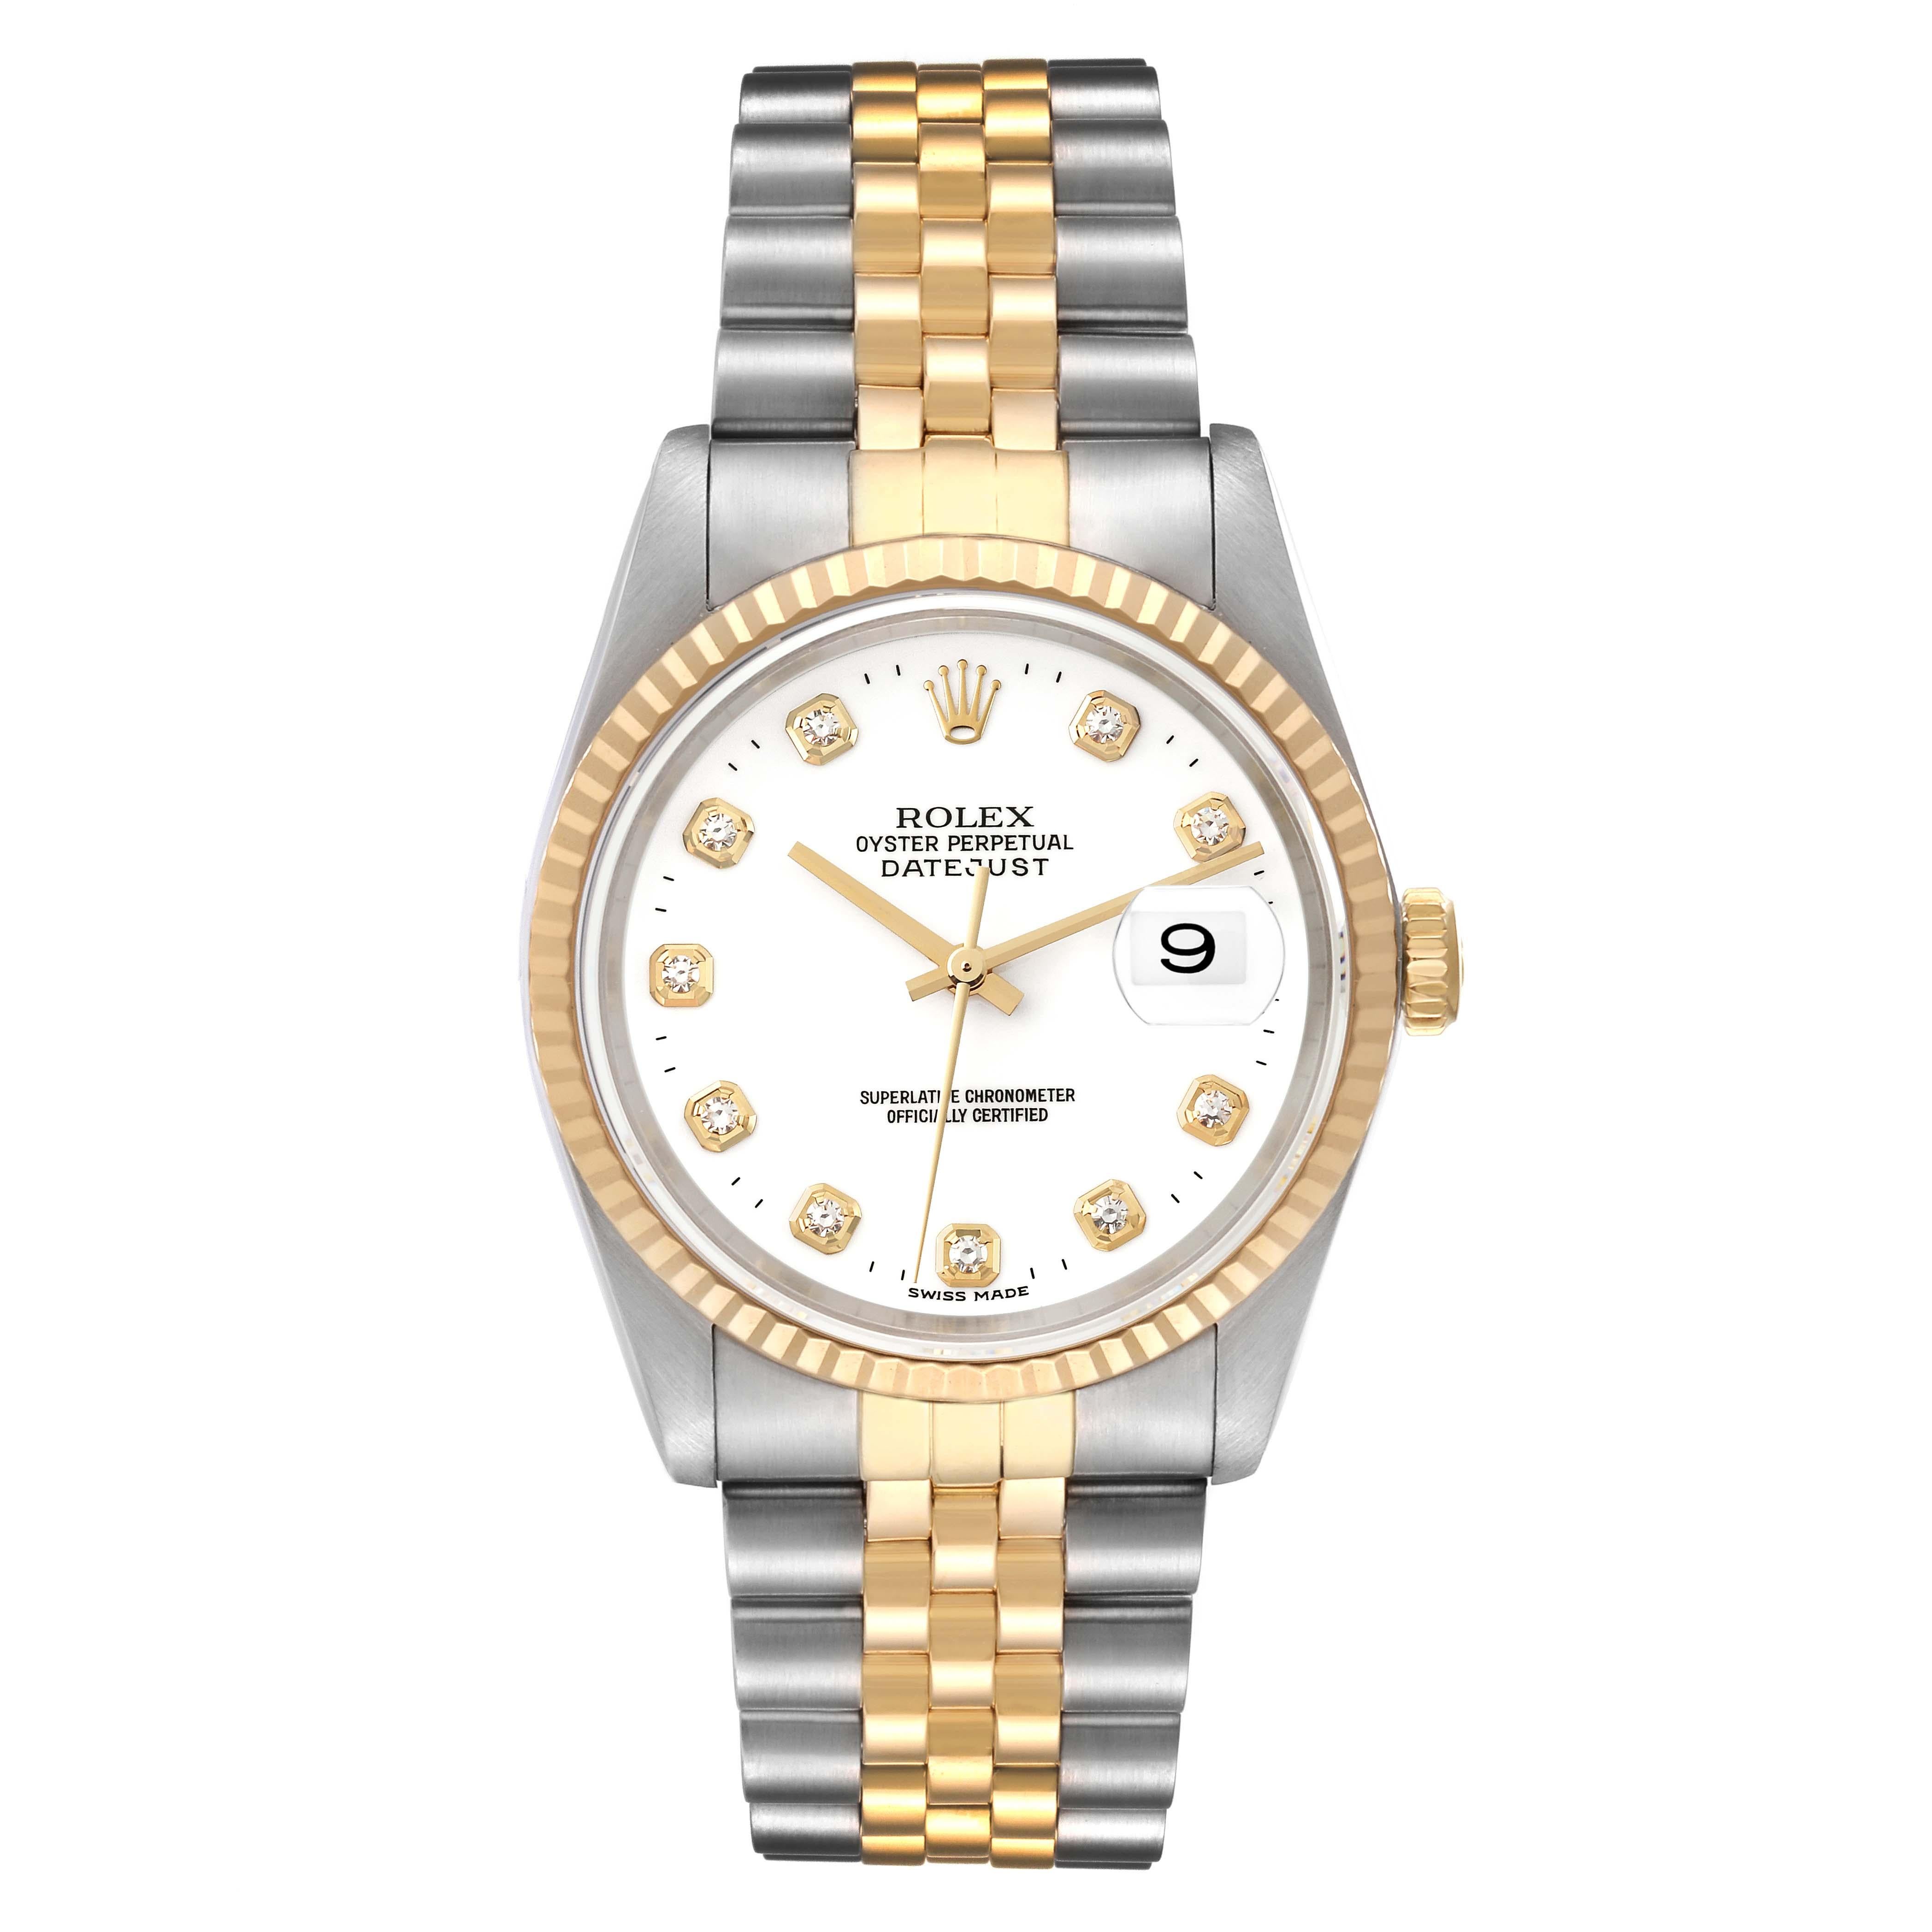 Rolex Datejust Diamond Dial Steel Yellow Gold Mens Watch 16233. Officially certified chronometer automatic self-winding movement. Stainless steel case 36.0 mm in diameter.  Rolex logo on an 18K yellow gold crown. 18k yellow gold fluted bezel.